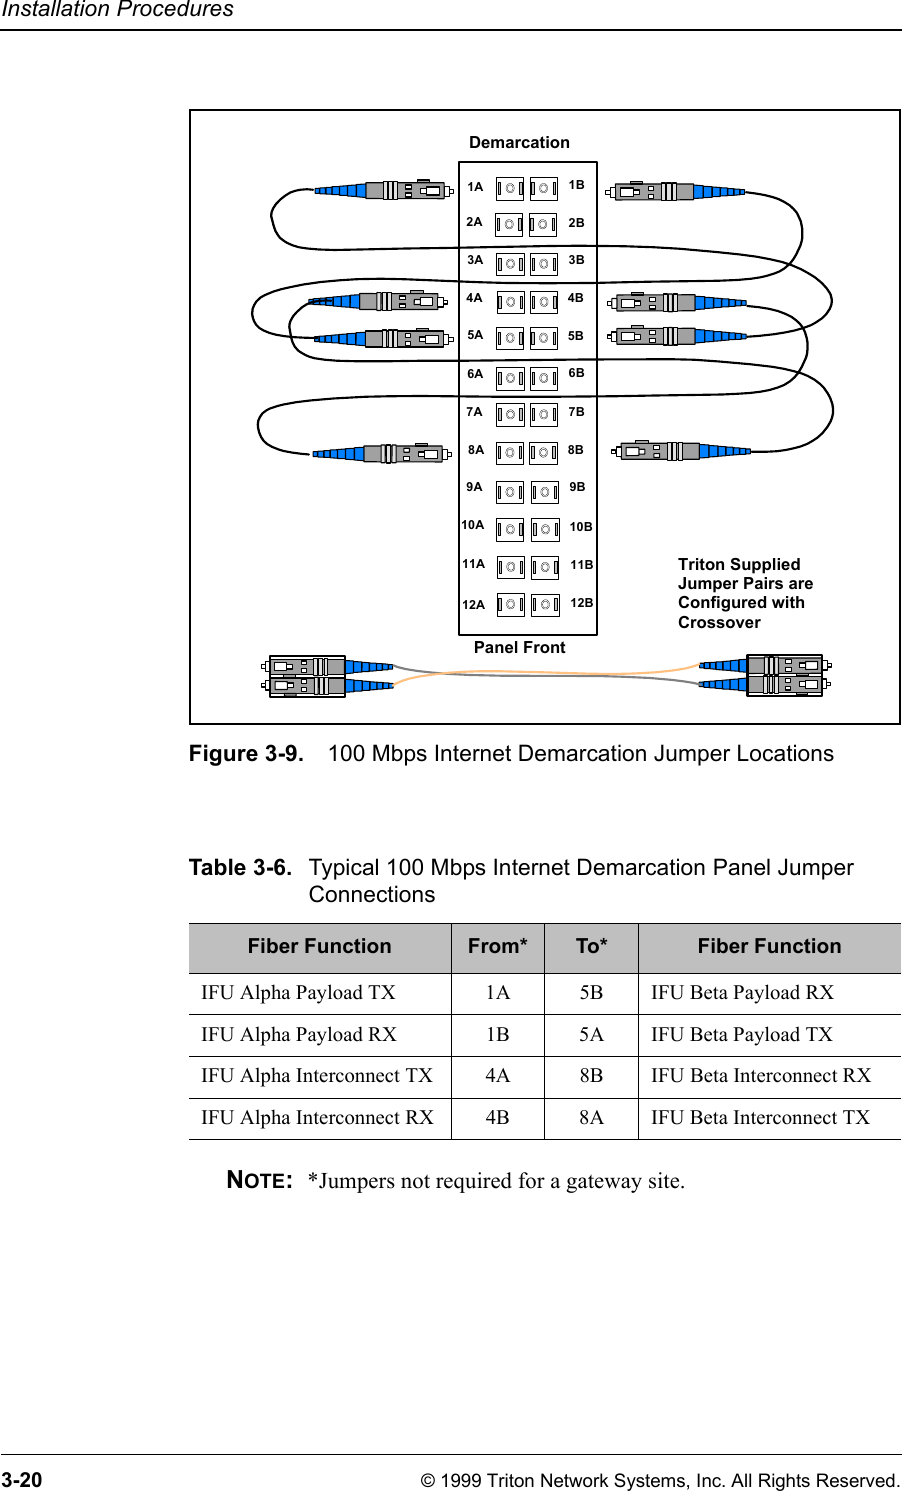 Installation Procedures3-20 © 1999 Triton Network Systems, Inc. All Rights Reserved.Figure 3-9. 100 Mbps Internet Demarcation Jumper LocationsNOTE:  *Jumpers not required for a gateway site.Table 3-6. Typical 100 Mbps Internet Demarcation Panel Jumper ConnectionsFiber Function From* To* Fiber FunctionIFU Alpha Payload TX 1A 5B IFU Beta Payload RXIFU Alpha Payload RX 1B 5A IFU Beta Payload TXIFU Alpha Interconnect TX 4A 8B IFU Beta Interconnect RXIFU Alpha Interconnect RX 4B 8A IFU Beta Interconnect TXPanel FrontTriton Supplied Jumper Pairs are Configured with CrossoverDemarcation1A 1B2A 2B3A 3B4A5A4B5B6A 6B7A 7B8A9B8B9A10A 10B11A 11B12A 12B